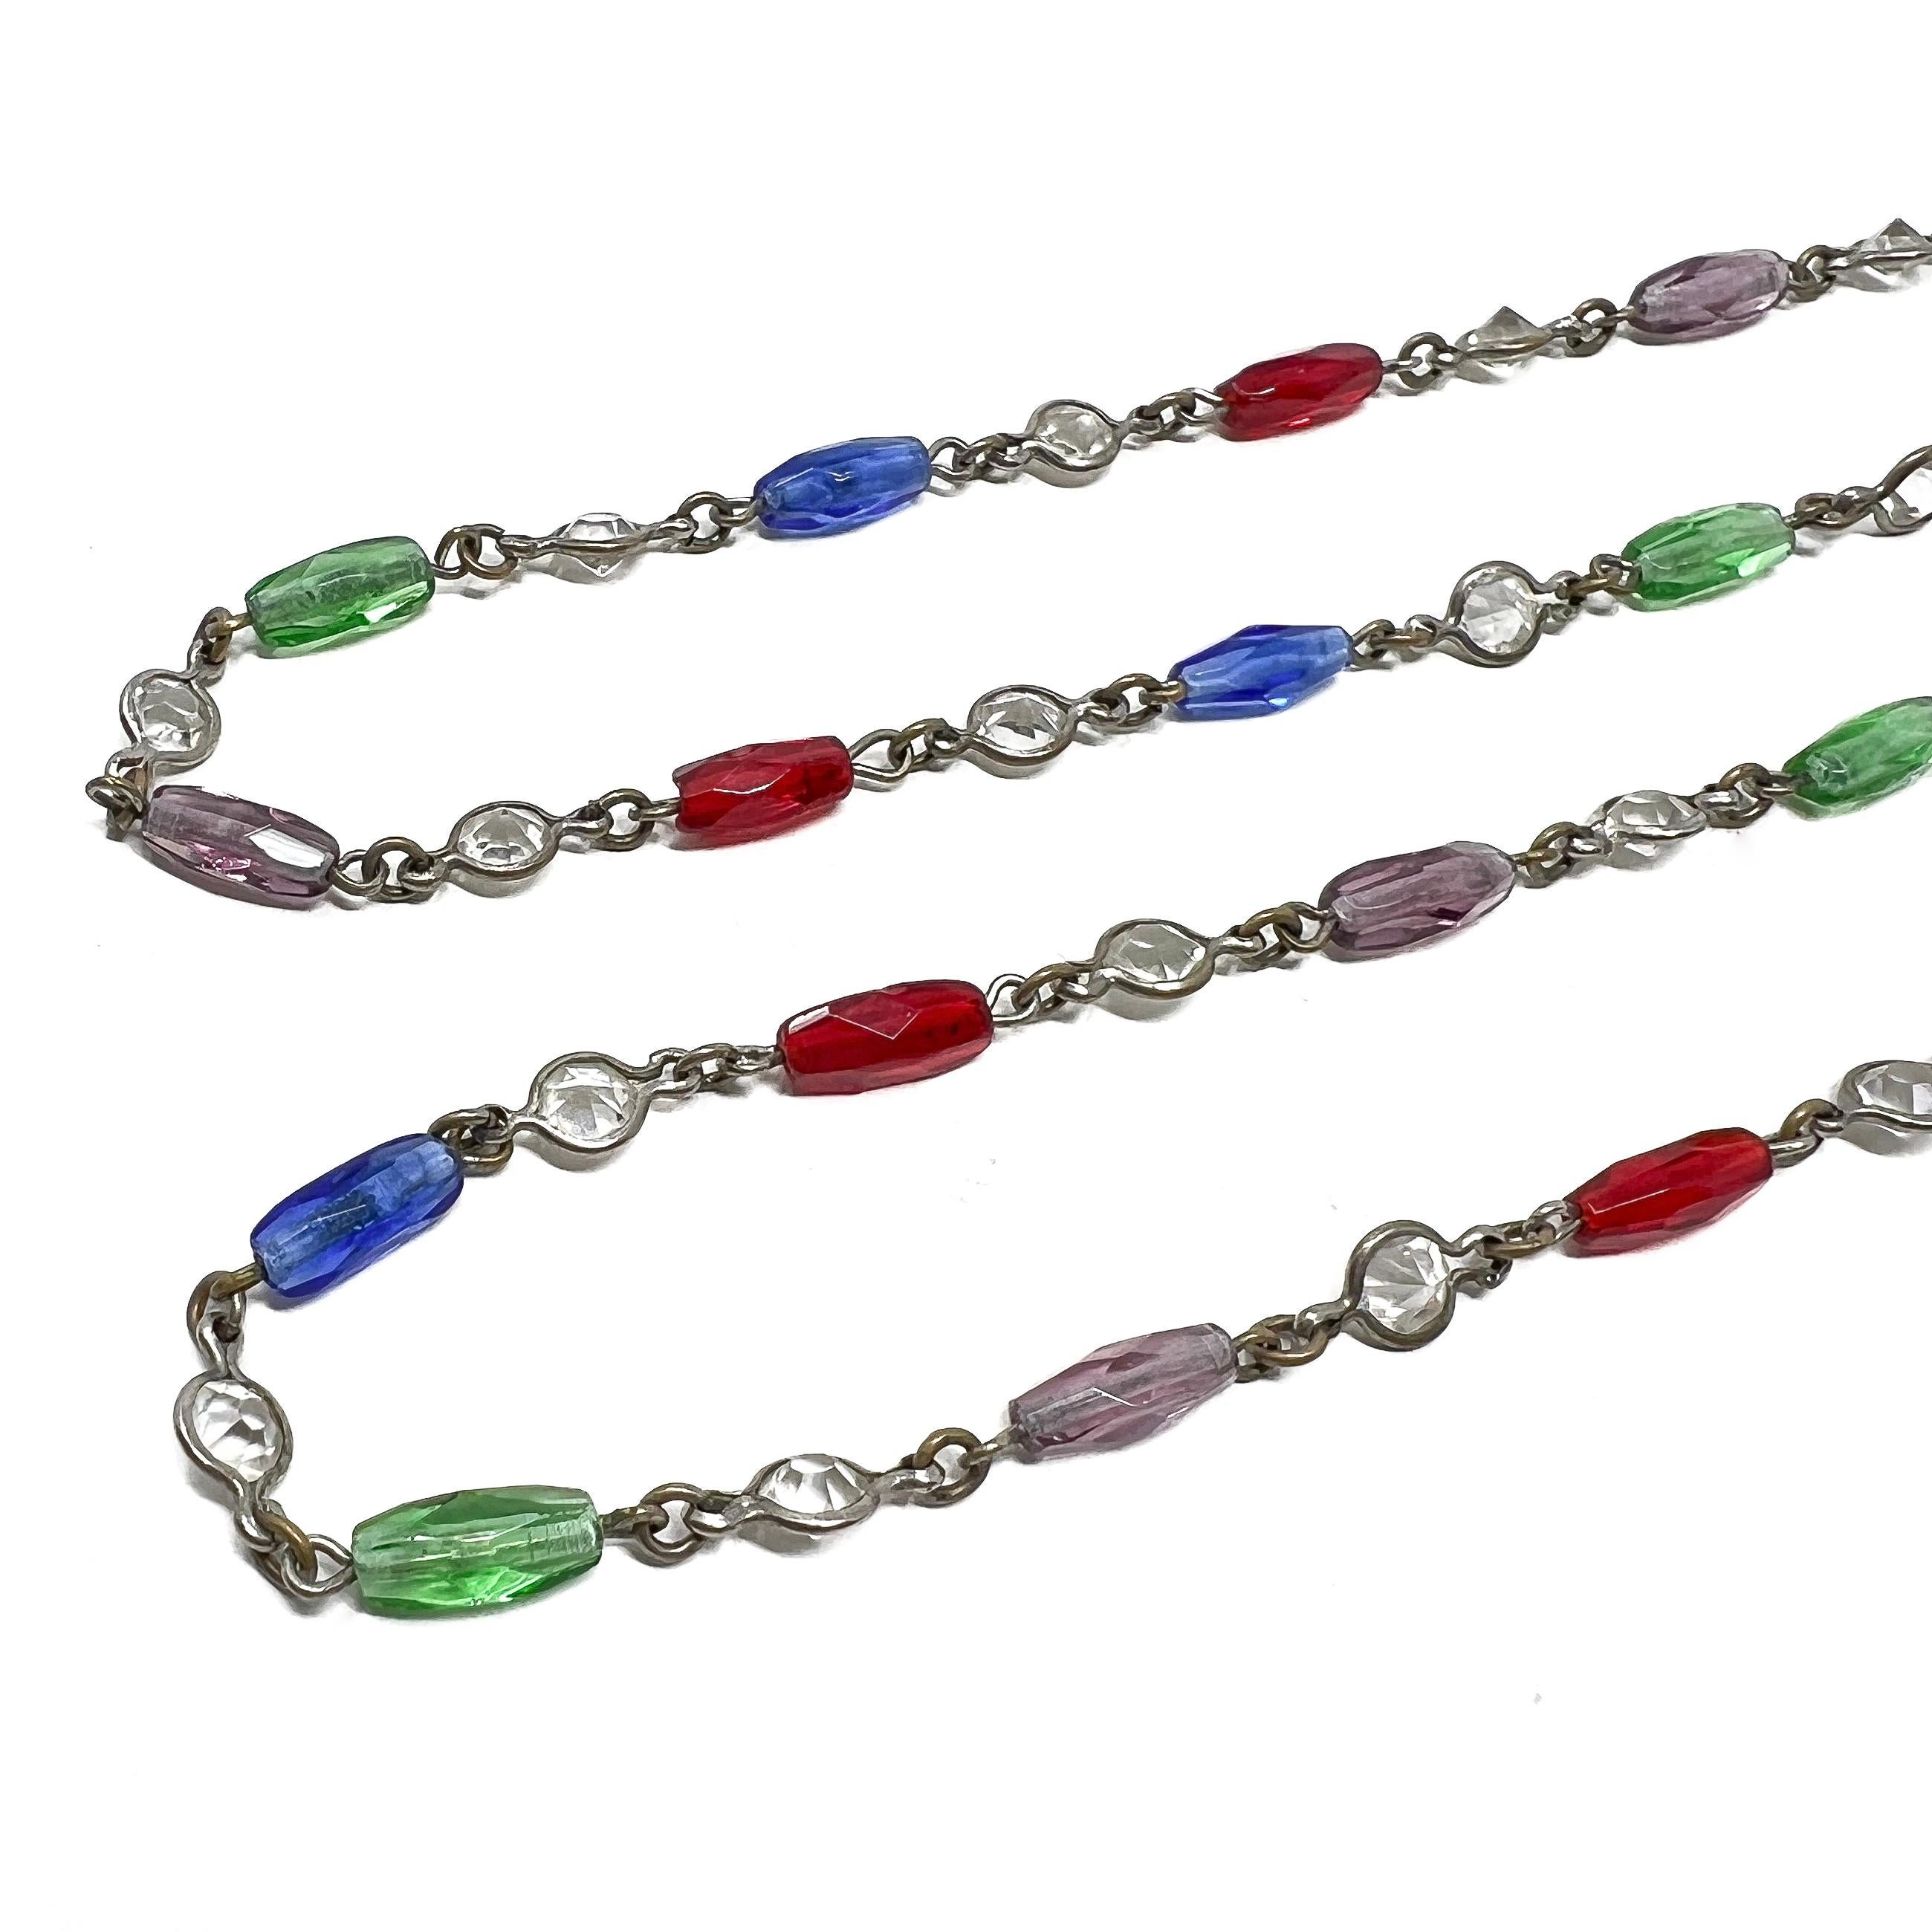 Women's Edwardian c.1900 Crystal and Multi-Coloured Glass Antique Long Guard Chain For Sale